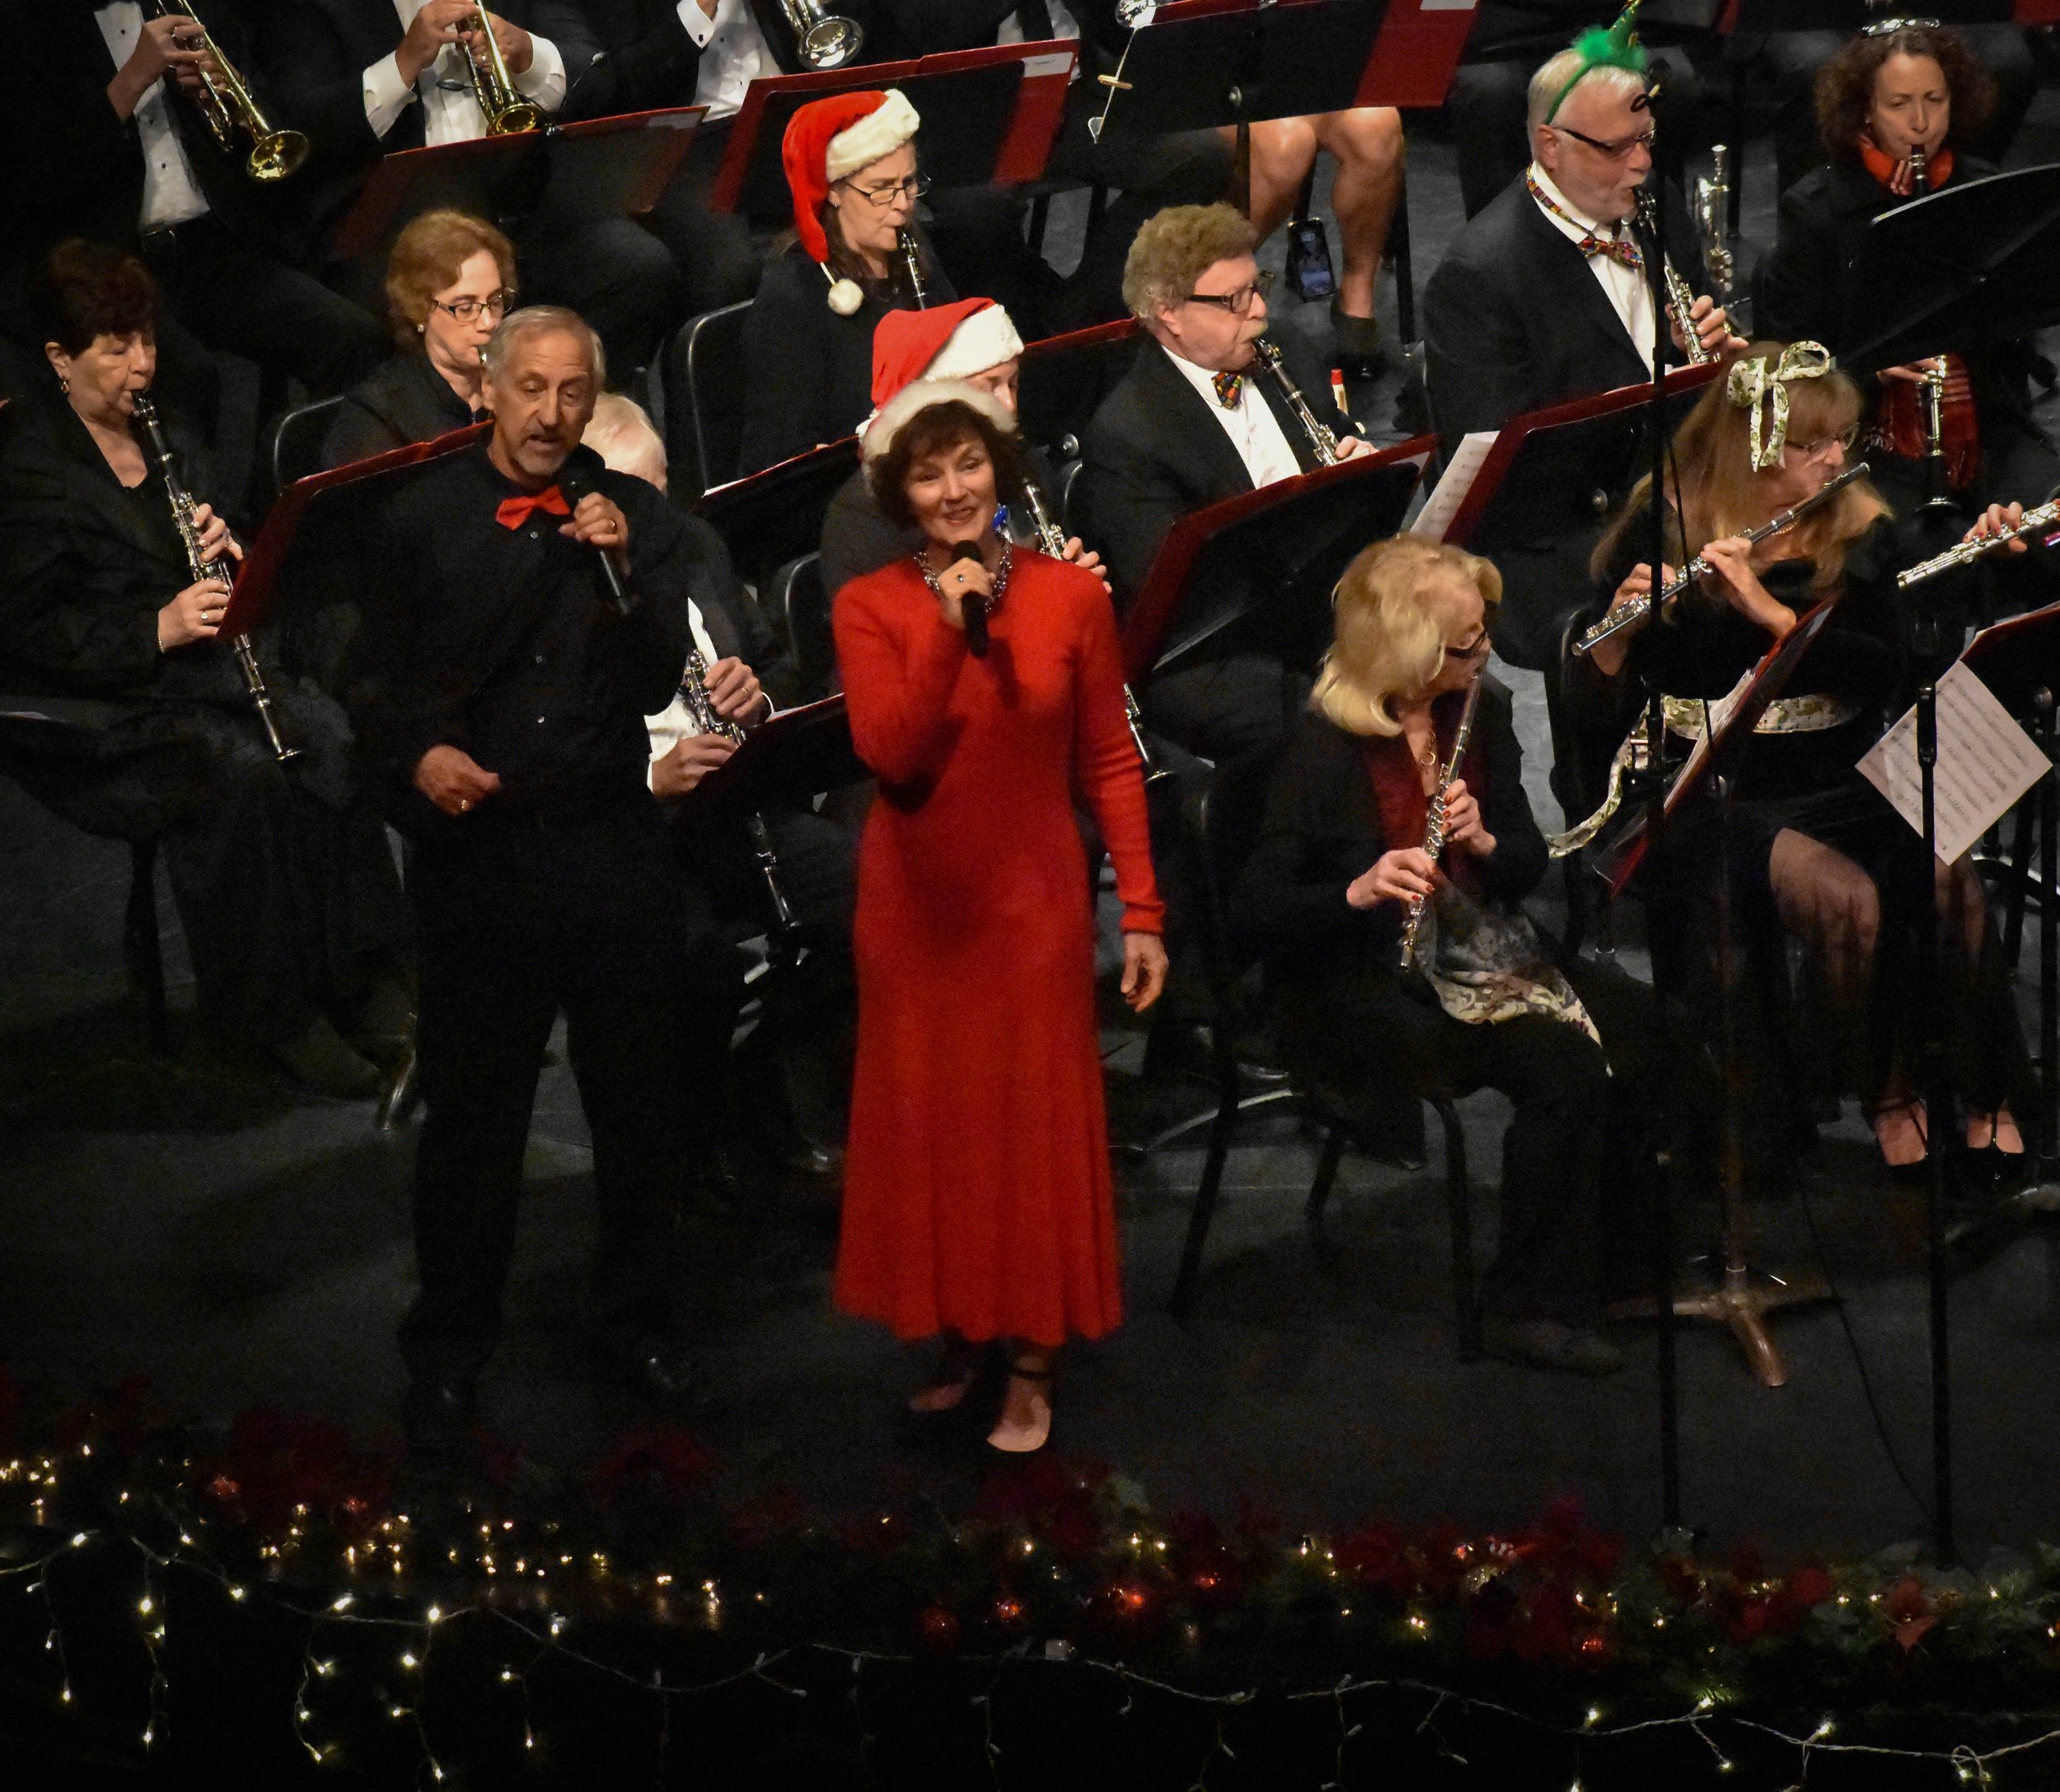 12-18-2022 LCCB Holiday Concert by Peyton Webster143-78.jpg